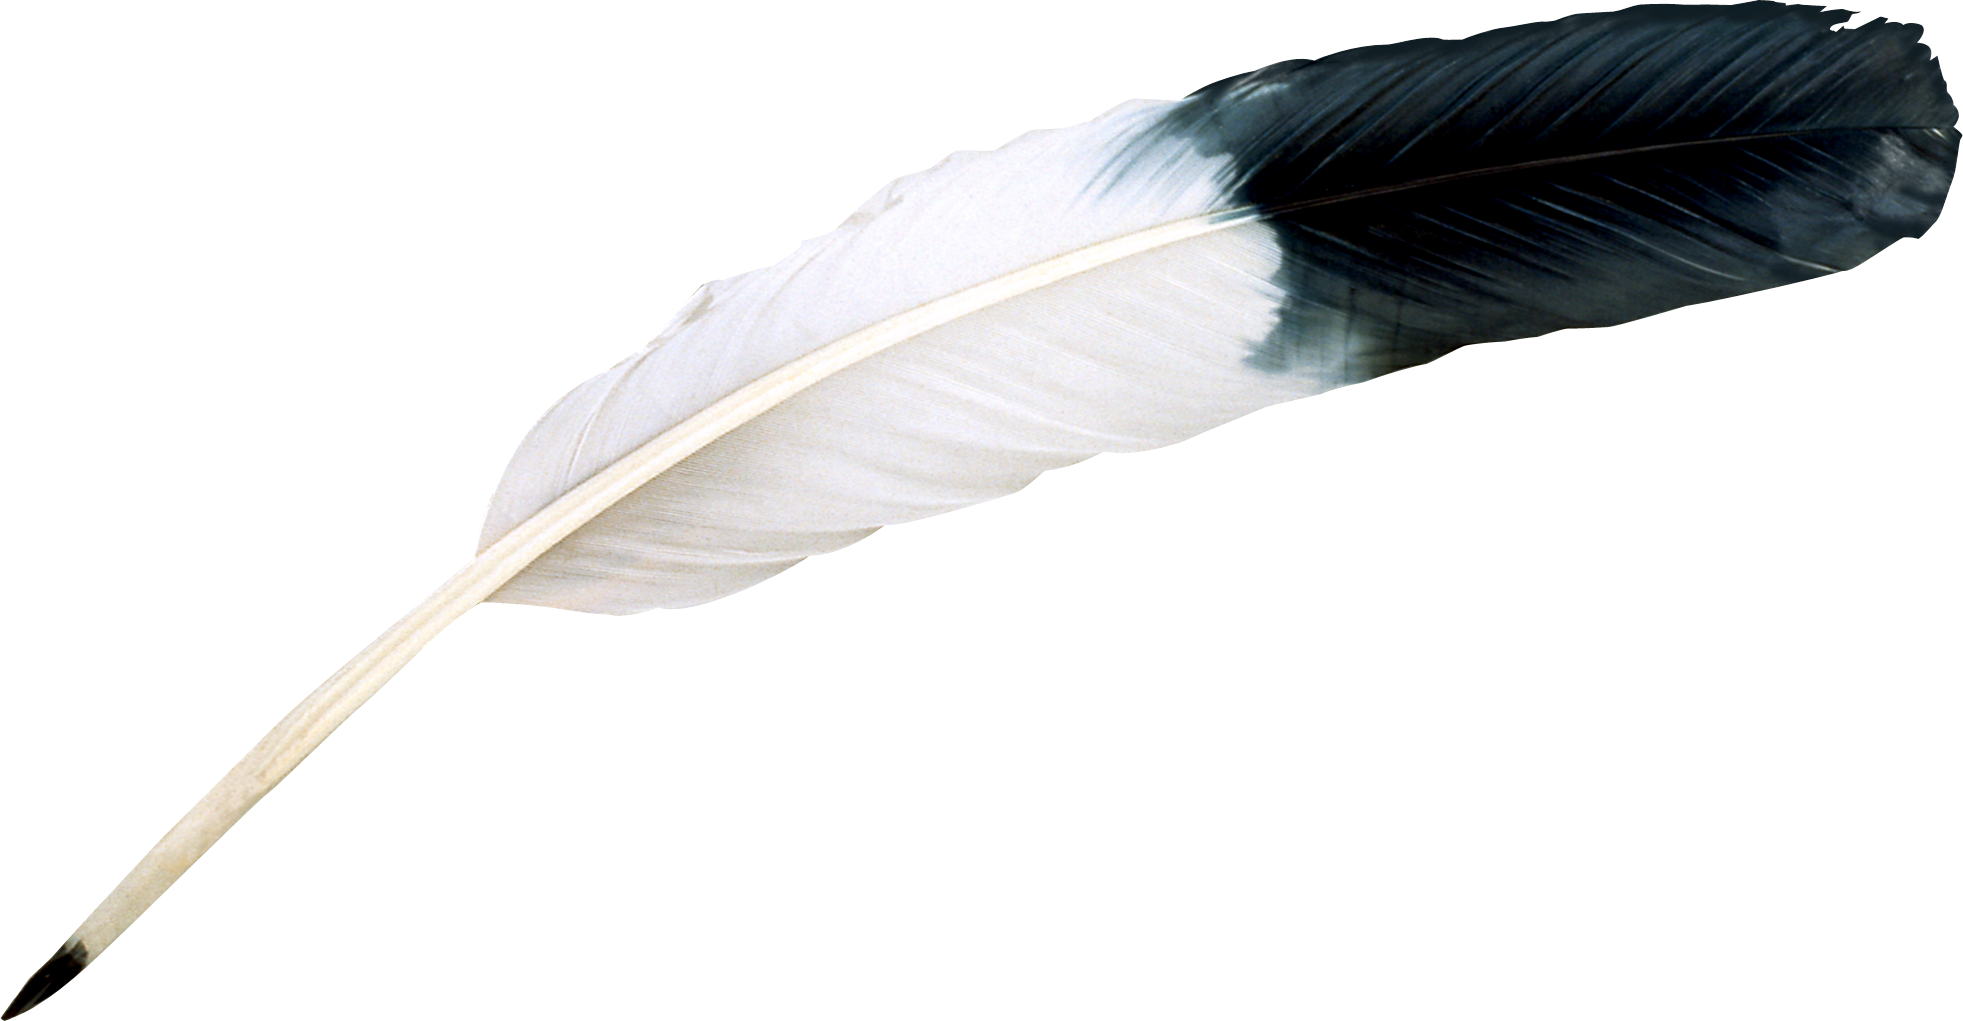 feathers clipart individual